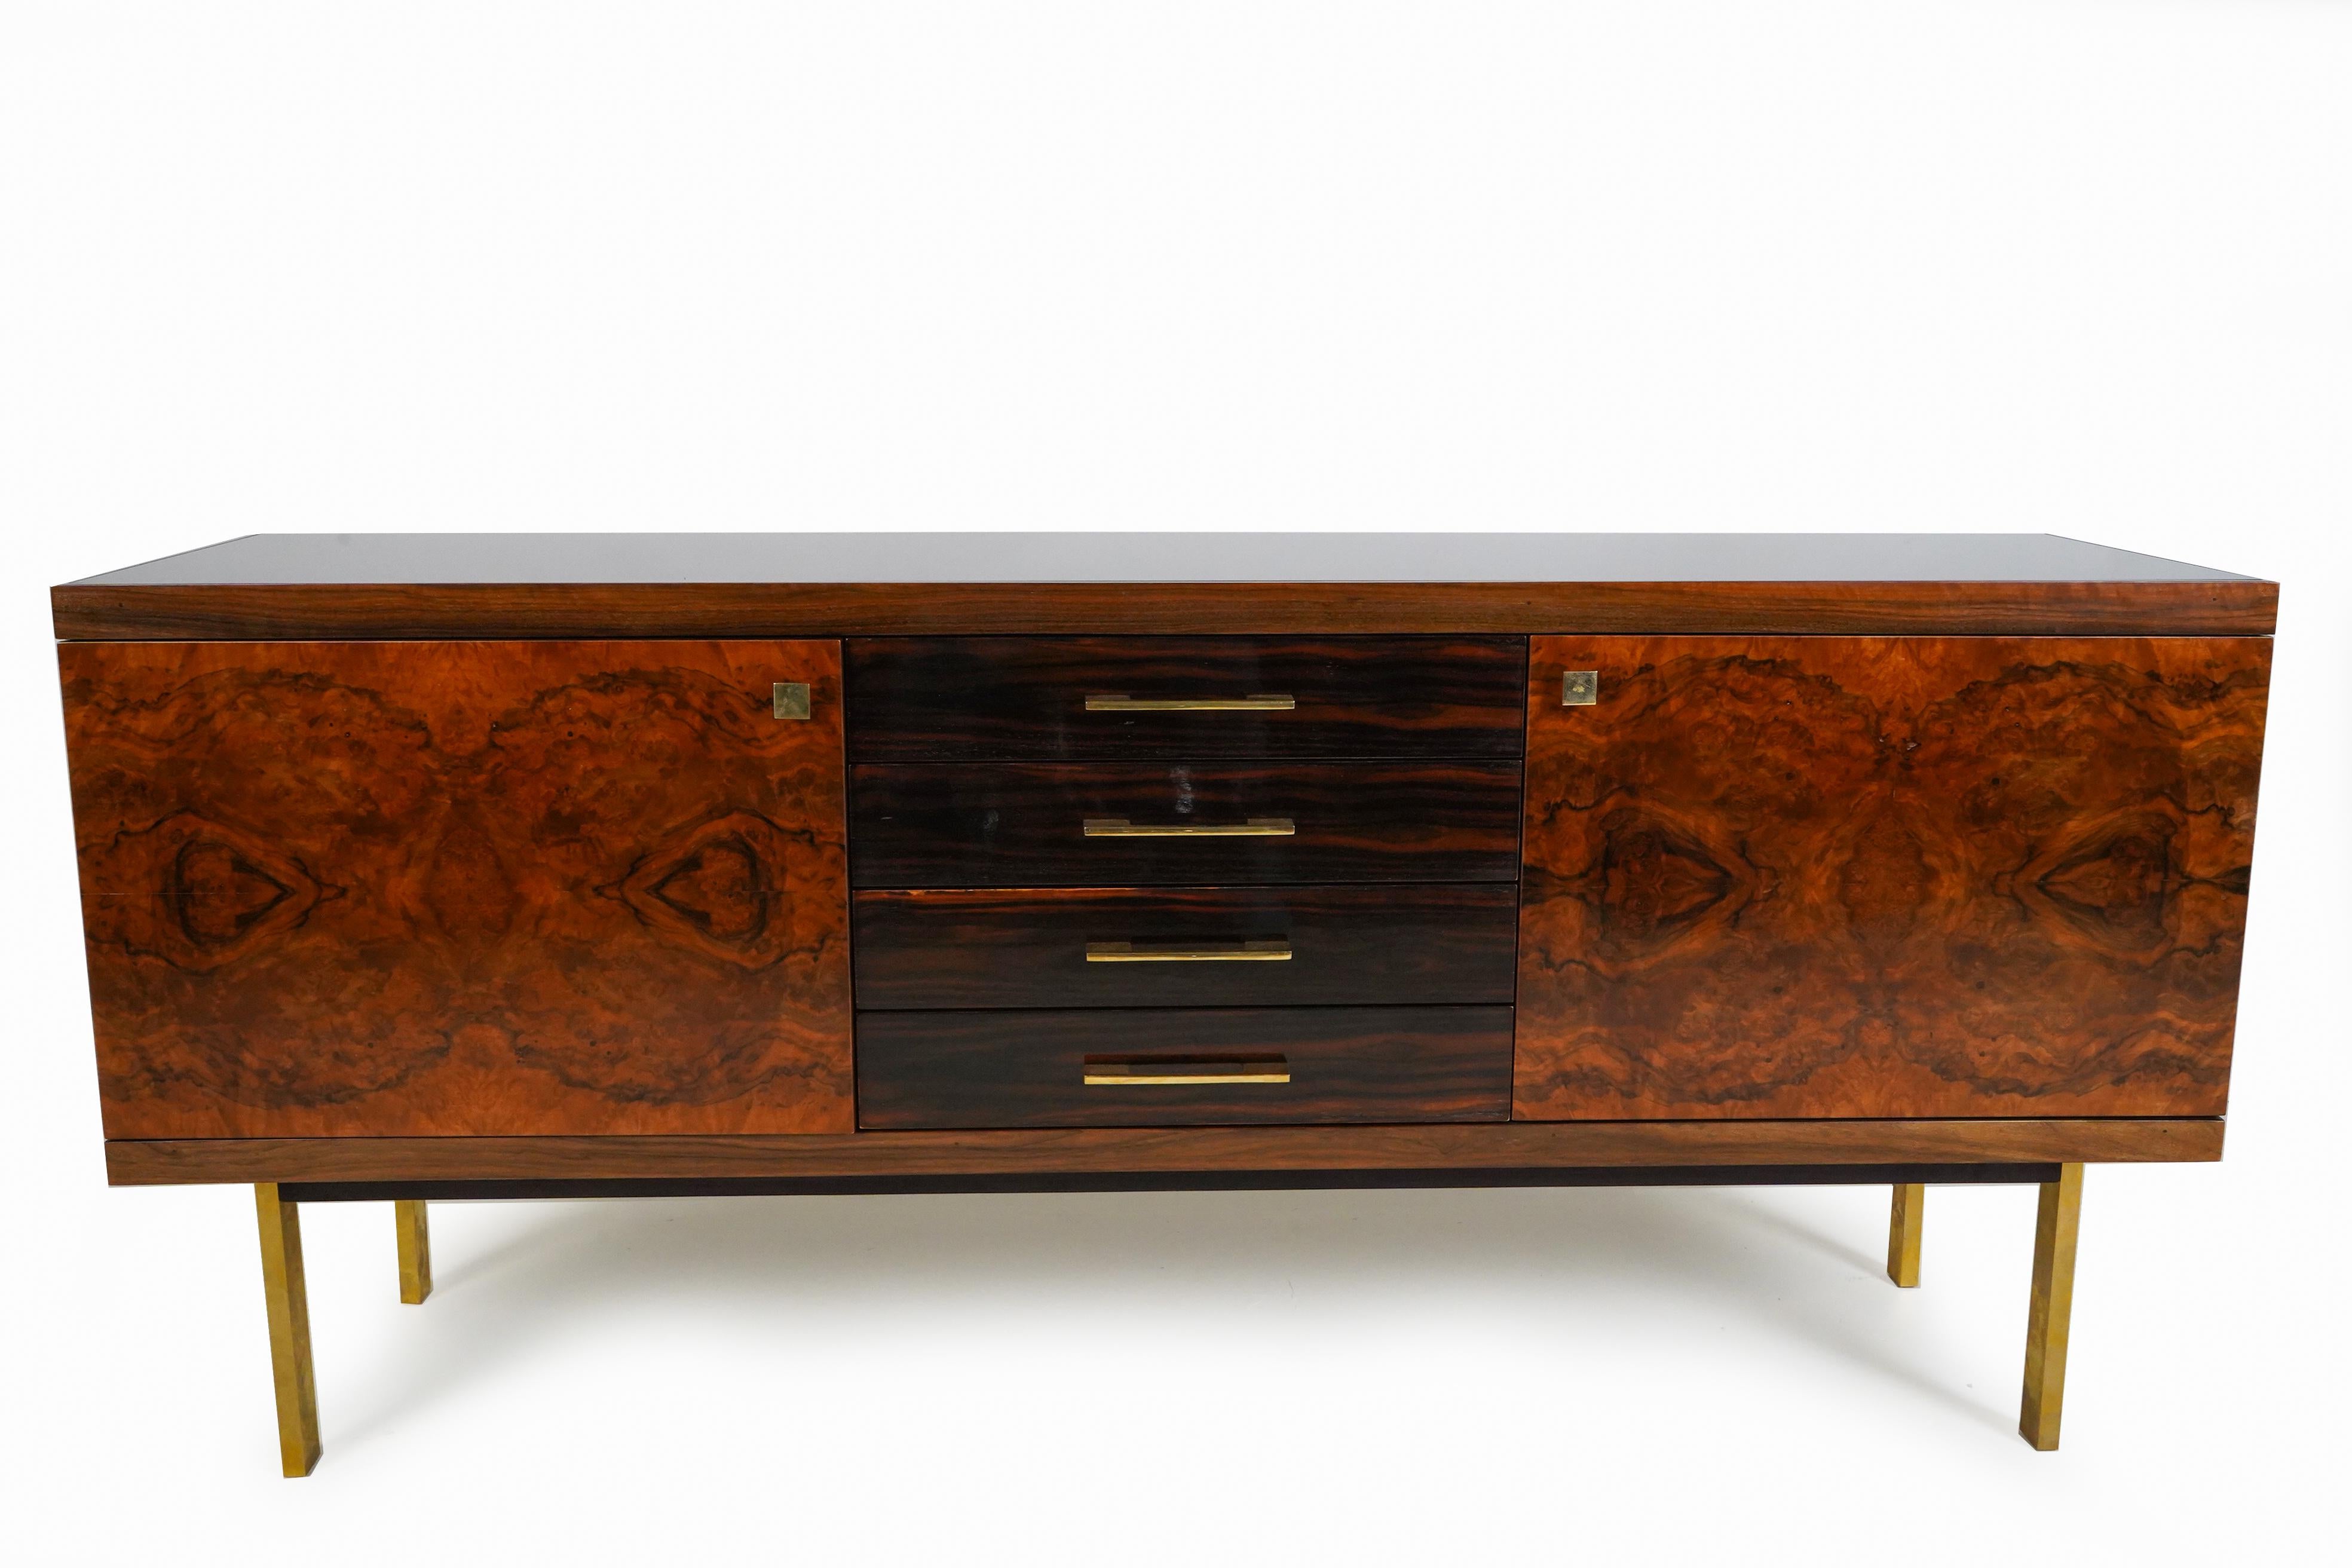 This sophisticated sideboard straddles the categories of Art Deco and Mid-century modern. It was made in a small atelier in Budapest, Hungary that has operated since the early 1900's. The distinctive aspect of the piece is its rich use of